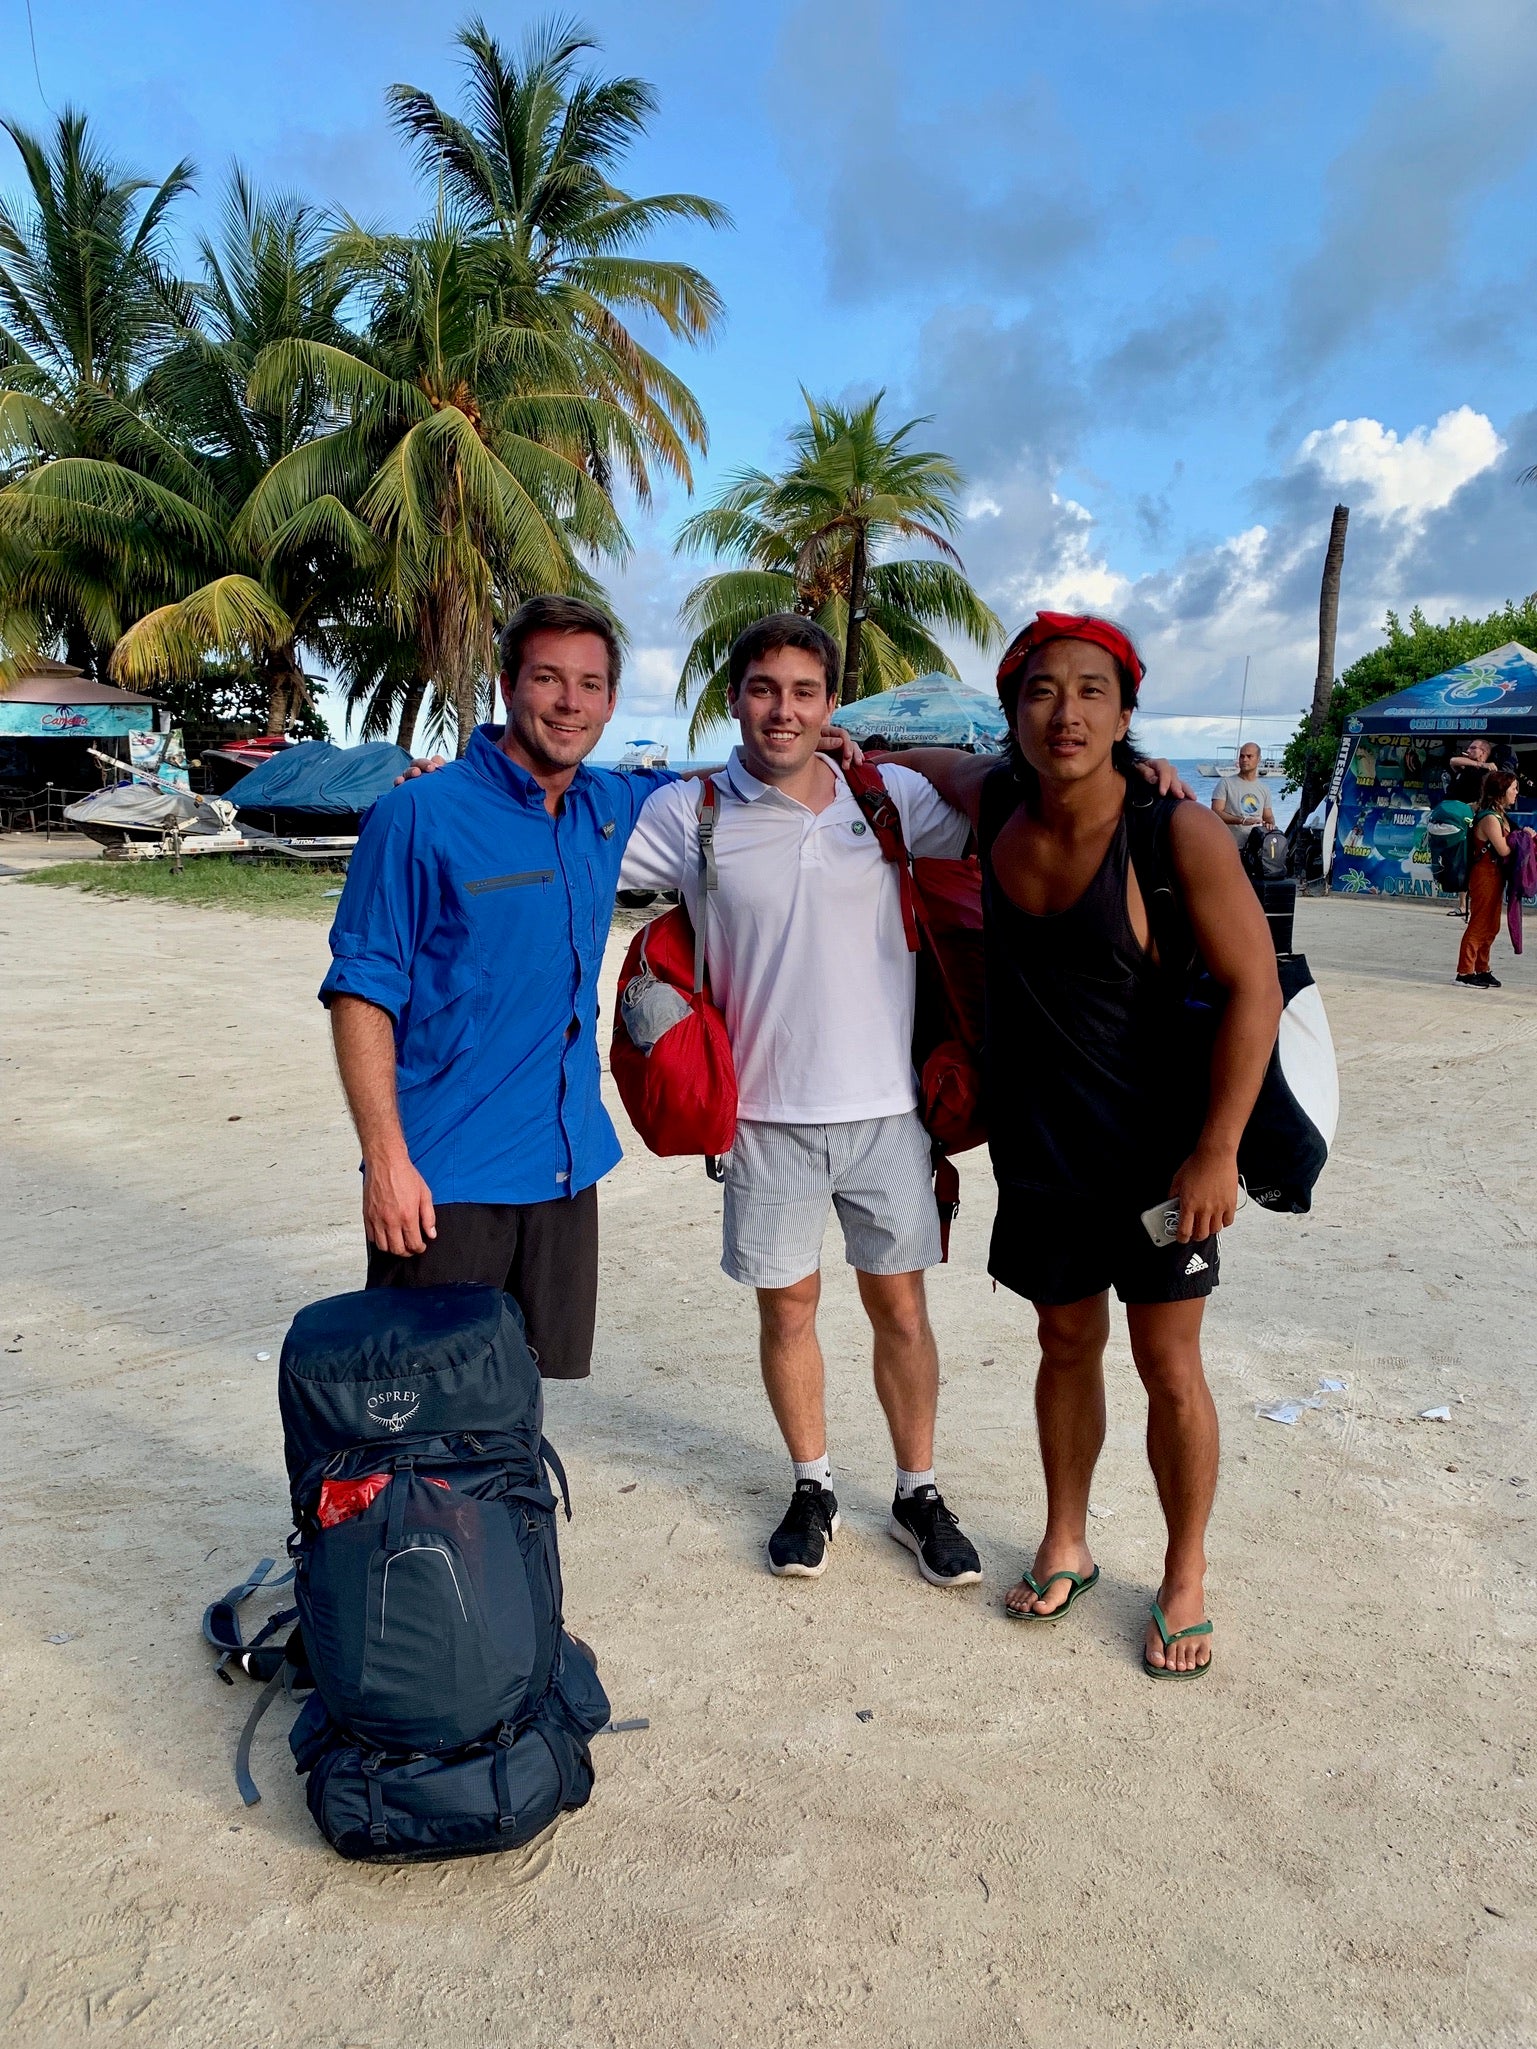 Footy Intl co-founder Drew with friend Kyle and their scuba diving instructor